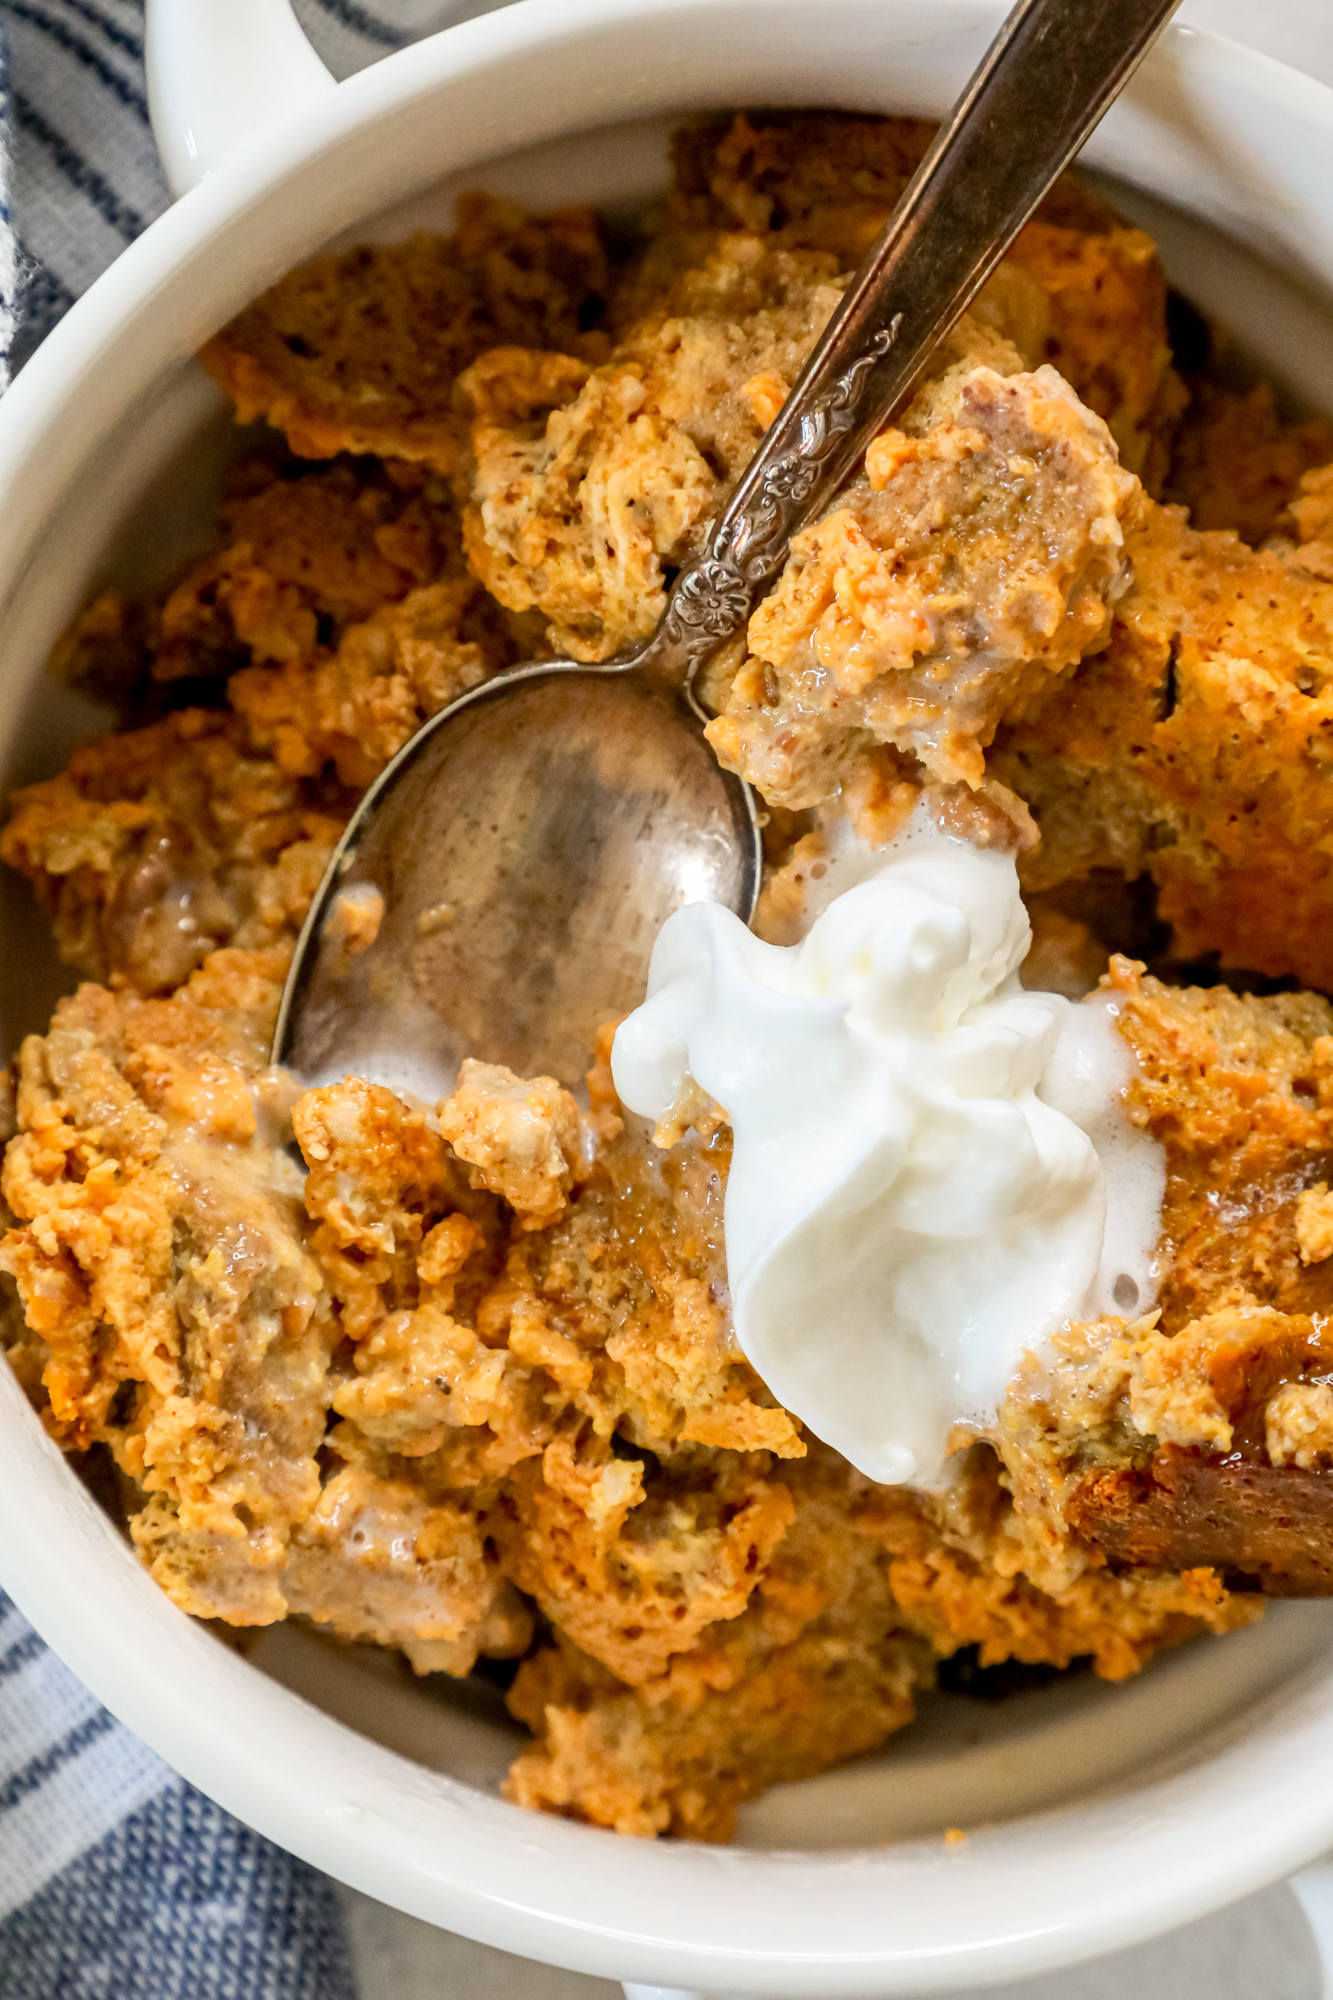 Slow Cooker Keto Pumpkin Bread Pudding served in a white bowl with sour cream garnish.